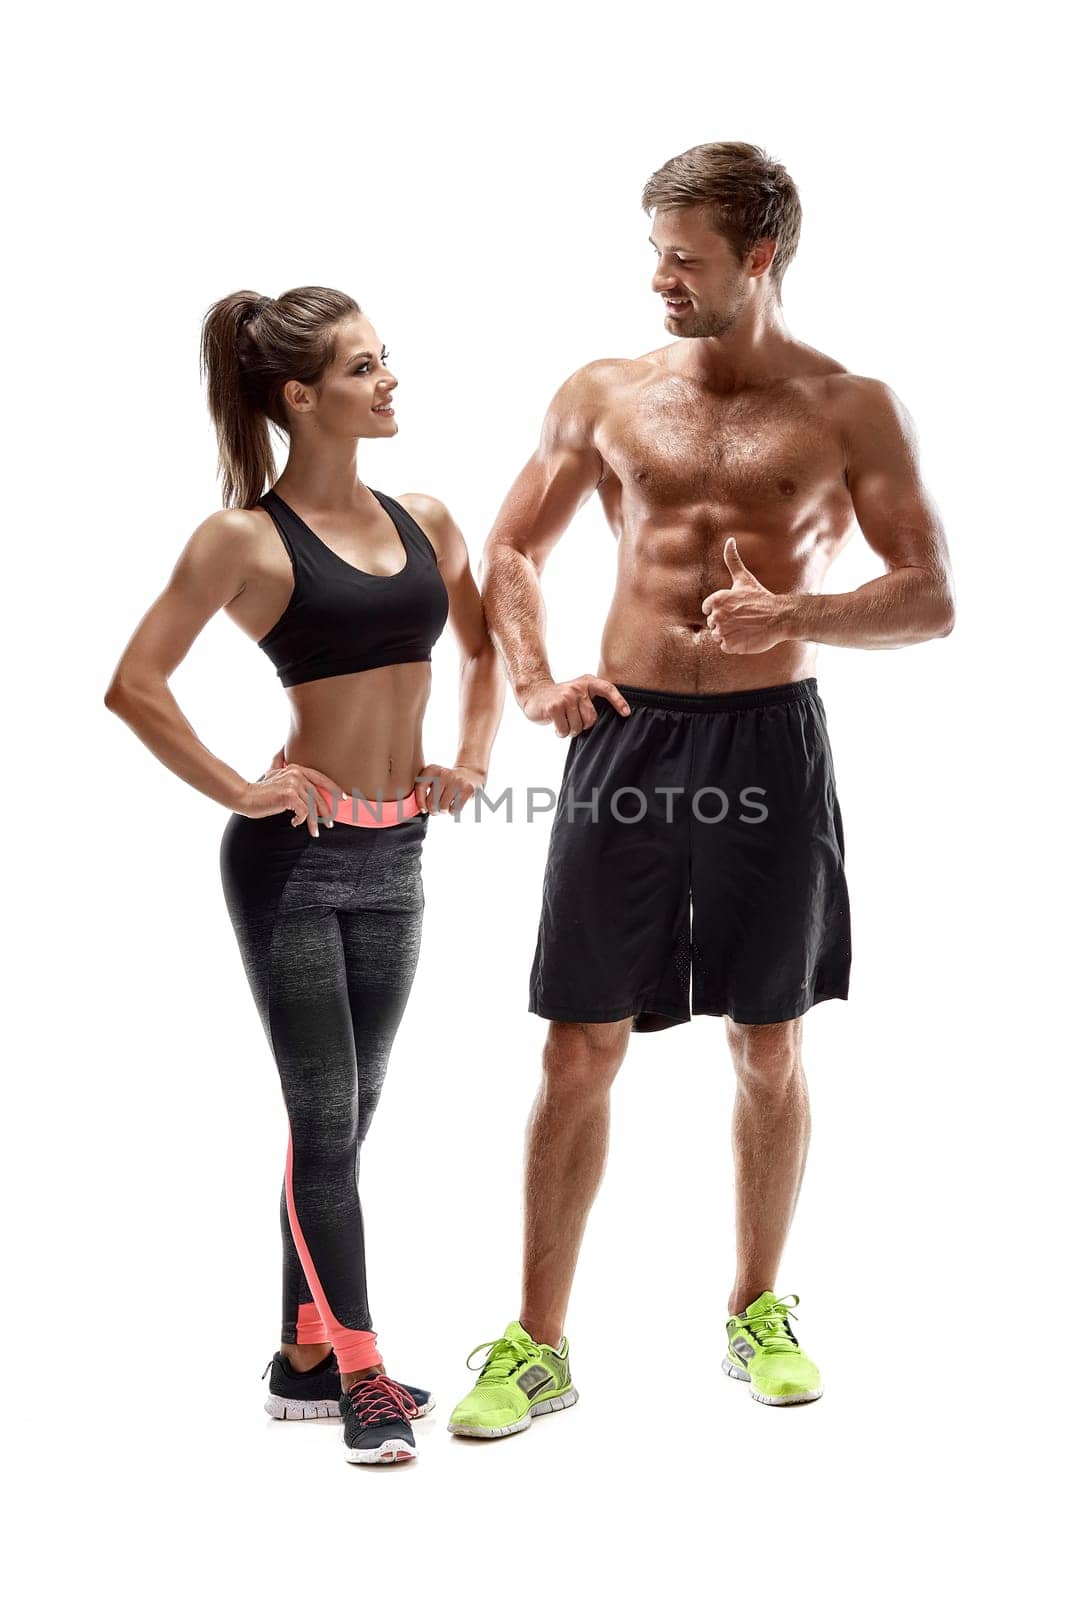 Young sportsmen couple woman and man in studio on white background. They look at each other